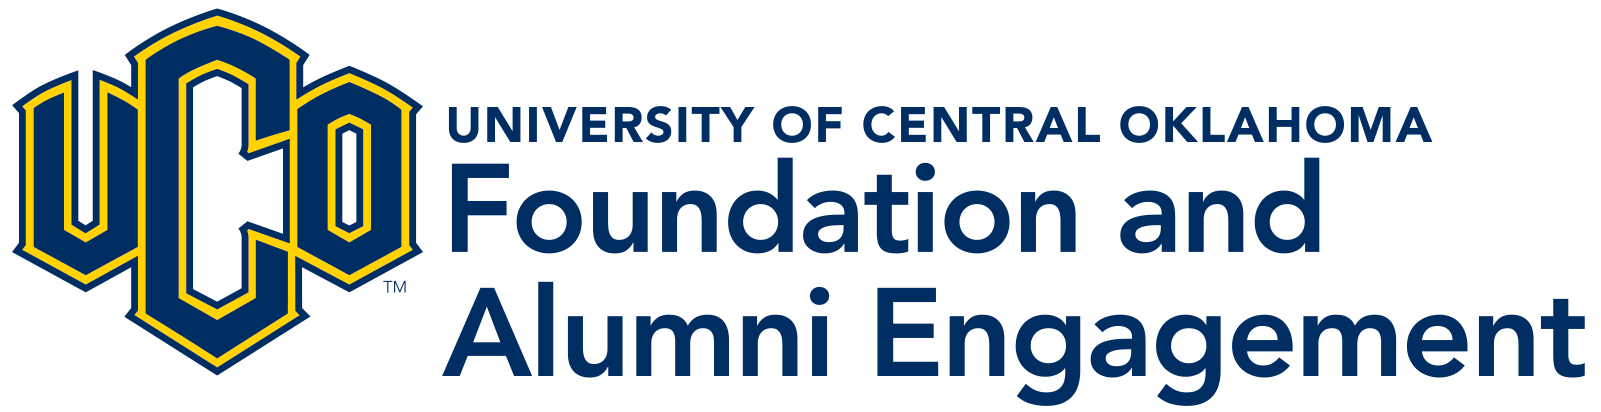 Foundation and Alumni Engagement Stacked Color logo